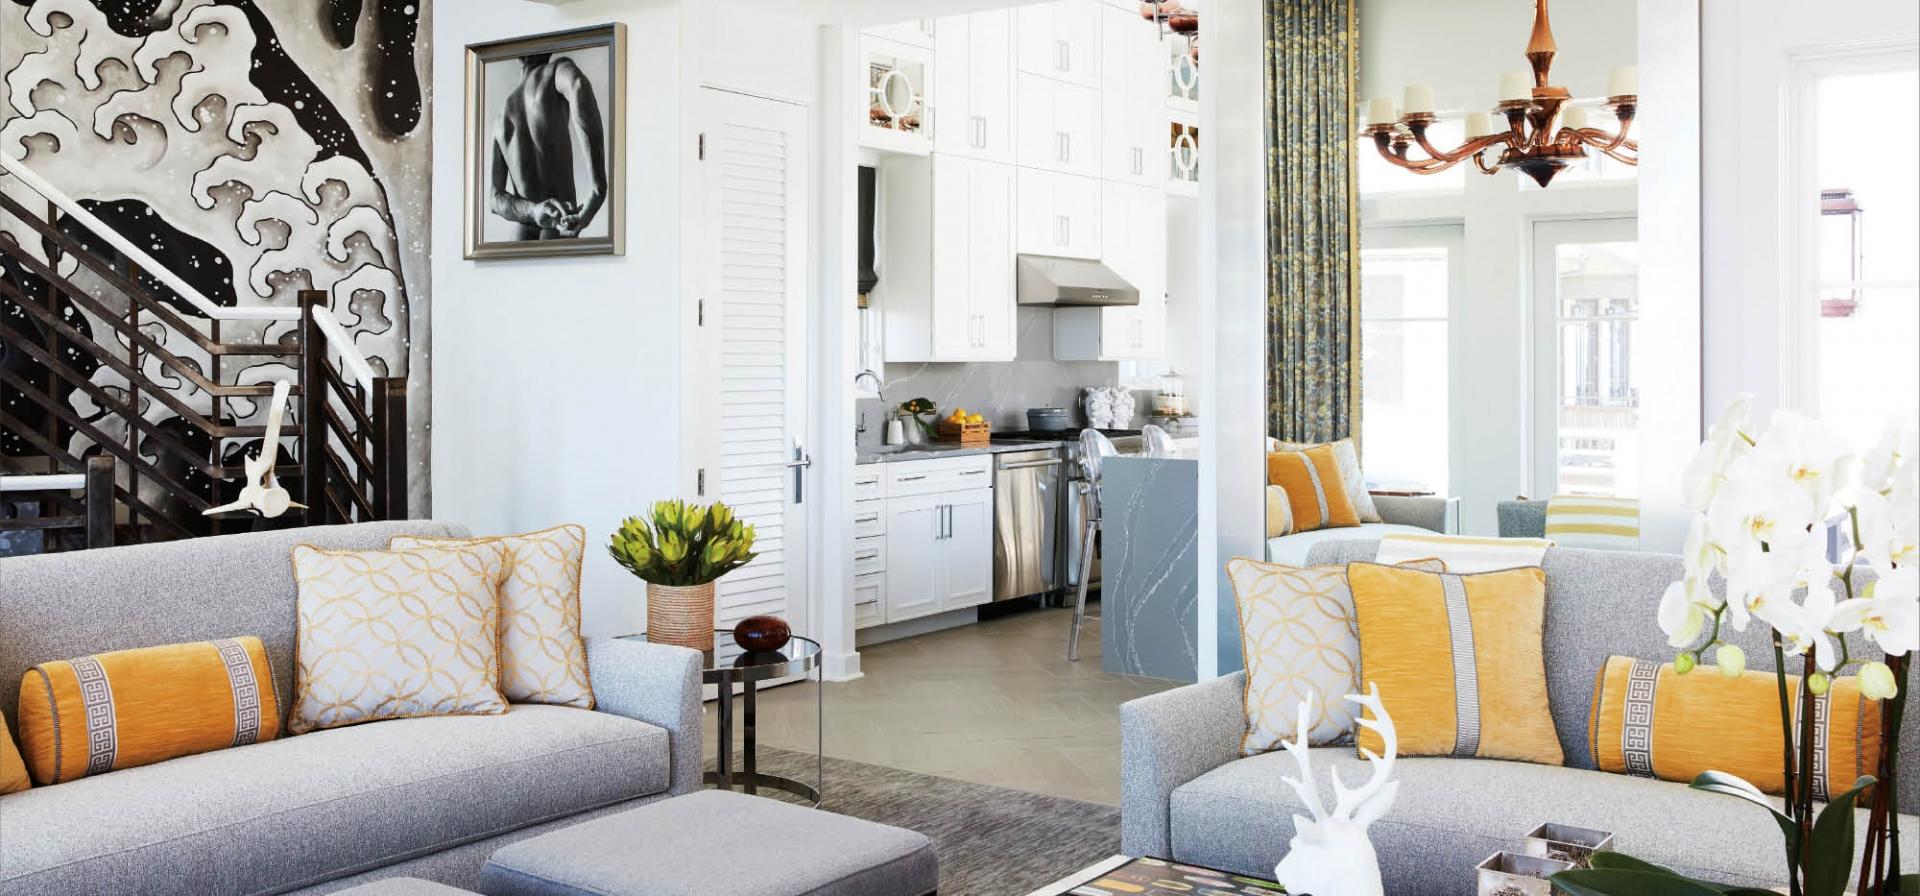 A Place to Call Home: Step Inside a Balmy Family Residence